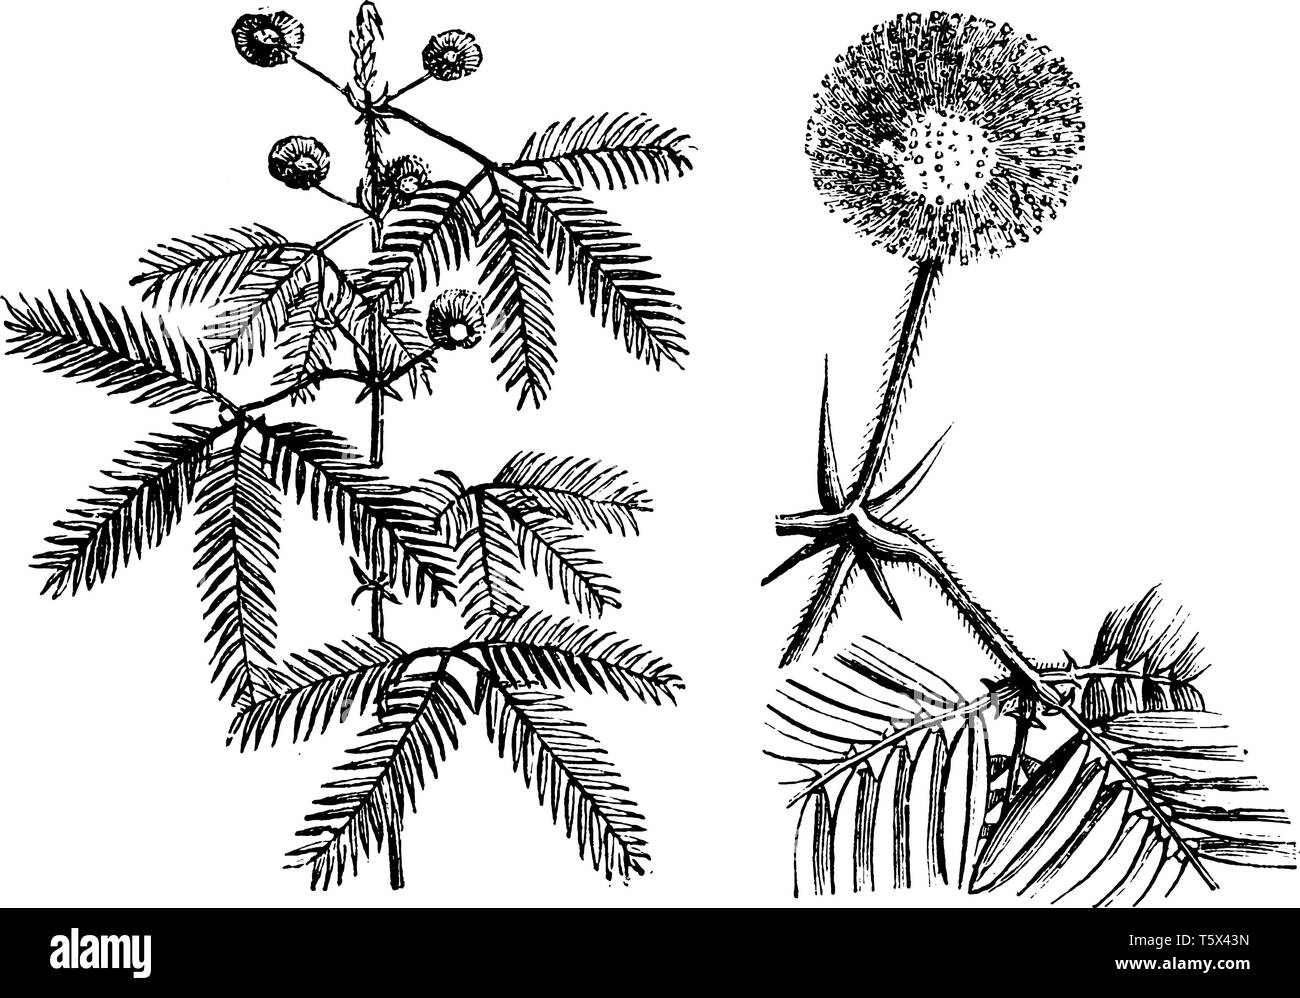 Mimosa pudica plants have compound leaves and small globular pink or mauve flower puffs. The leaves droop in response to darkness and reopen with dayl Stock Vector